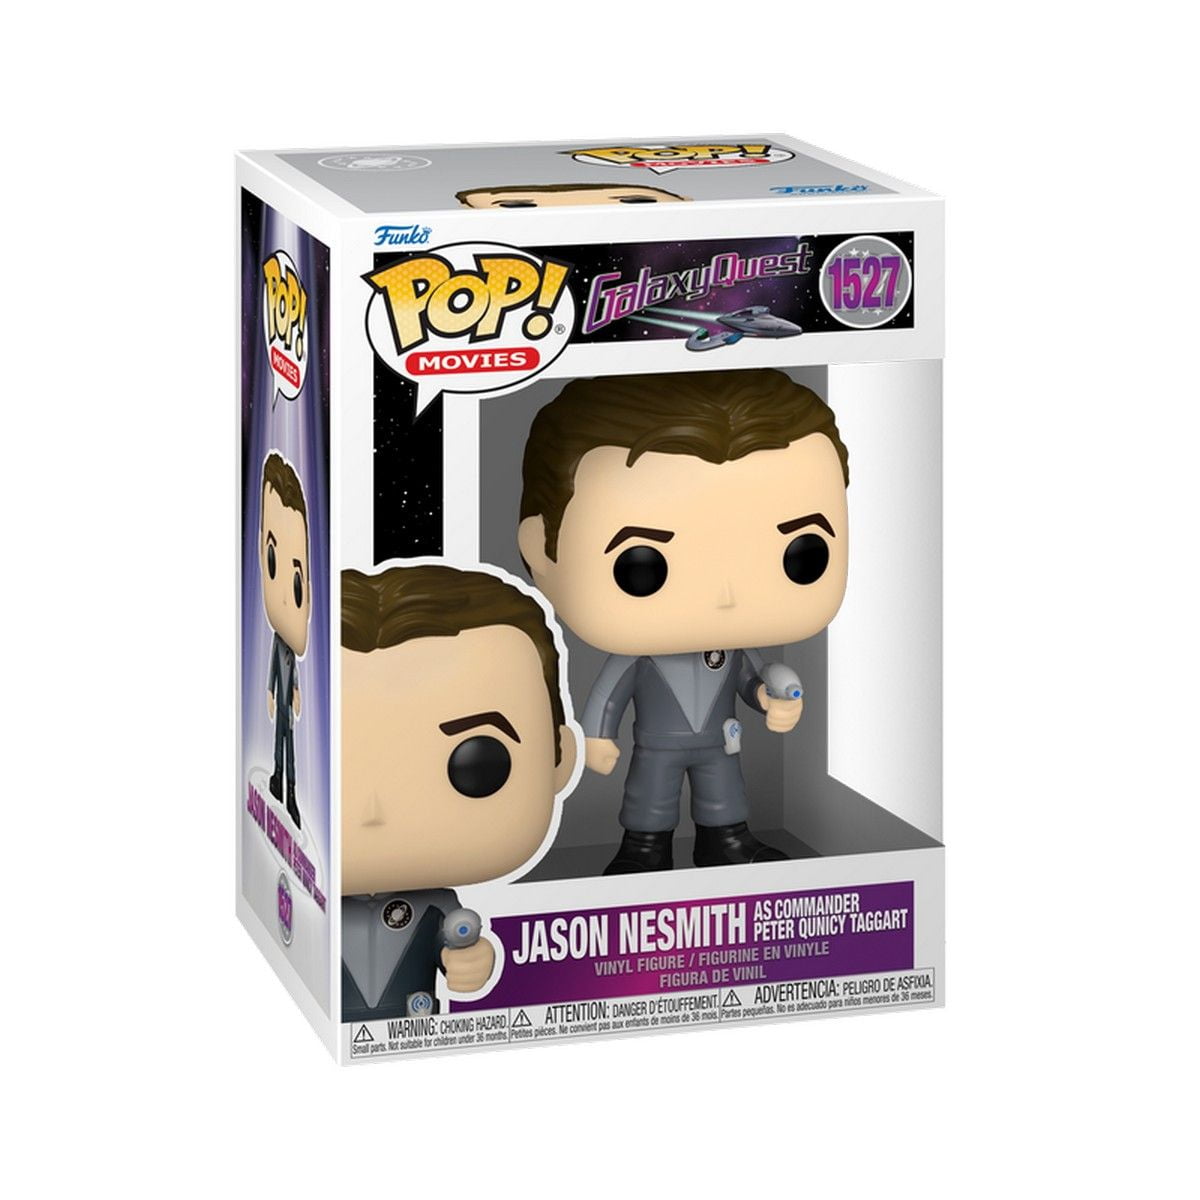 Jason Nesmith as Commander Peter Quincy Taggart - Galaxy Quest - Funko POP! Movies (1527)